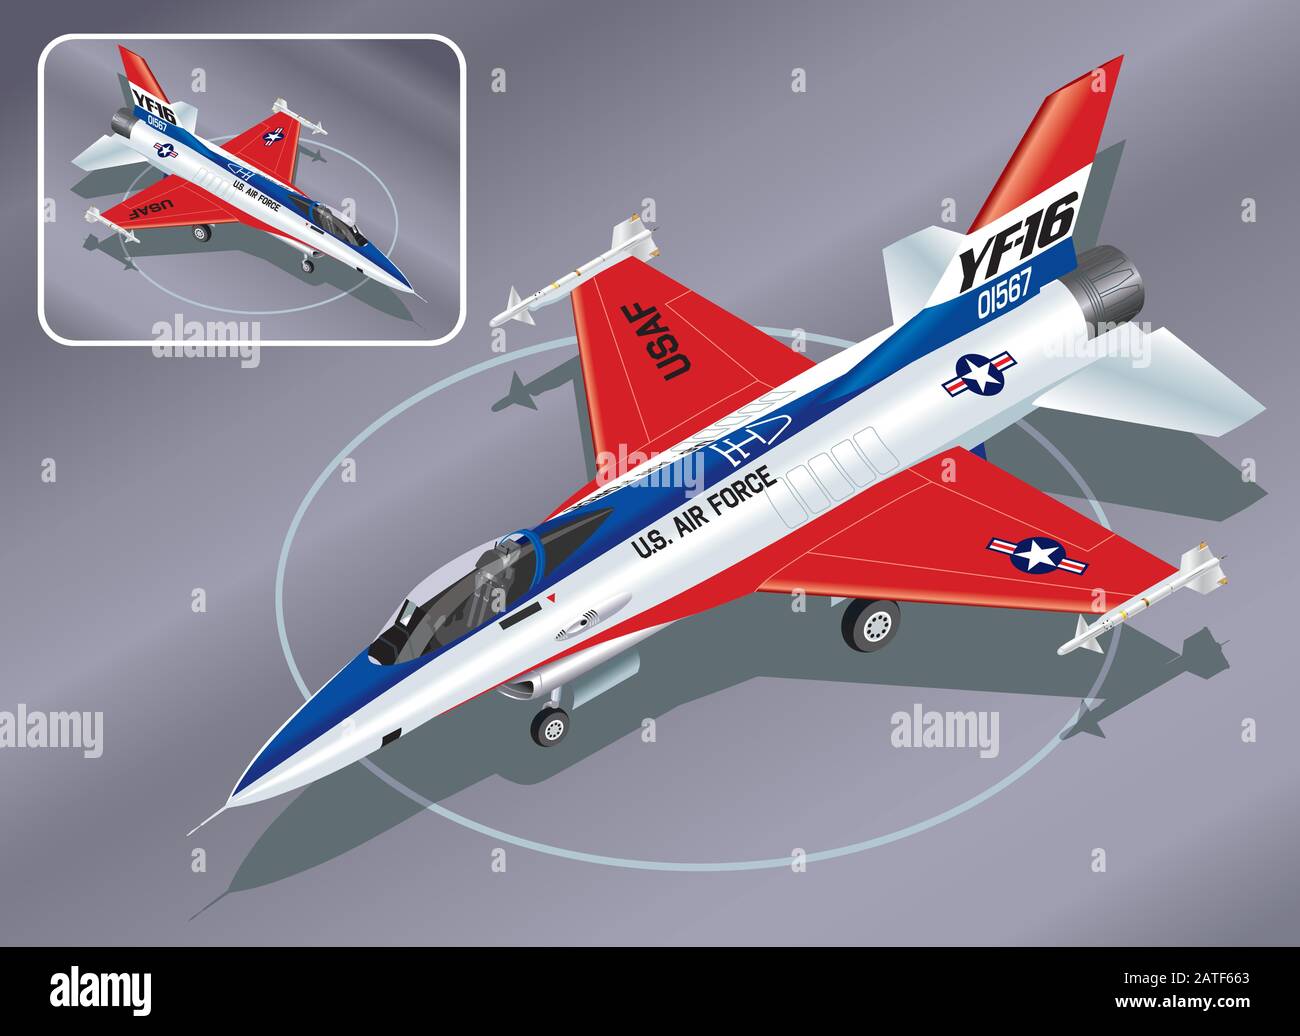 Detailed Isometric Vector Illustration of an F-16 Falcon Fighter Jet Stock Vector